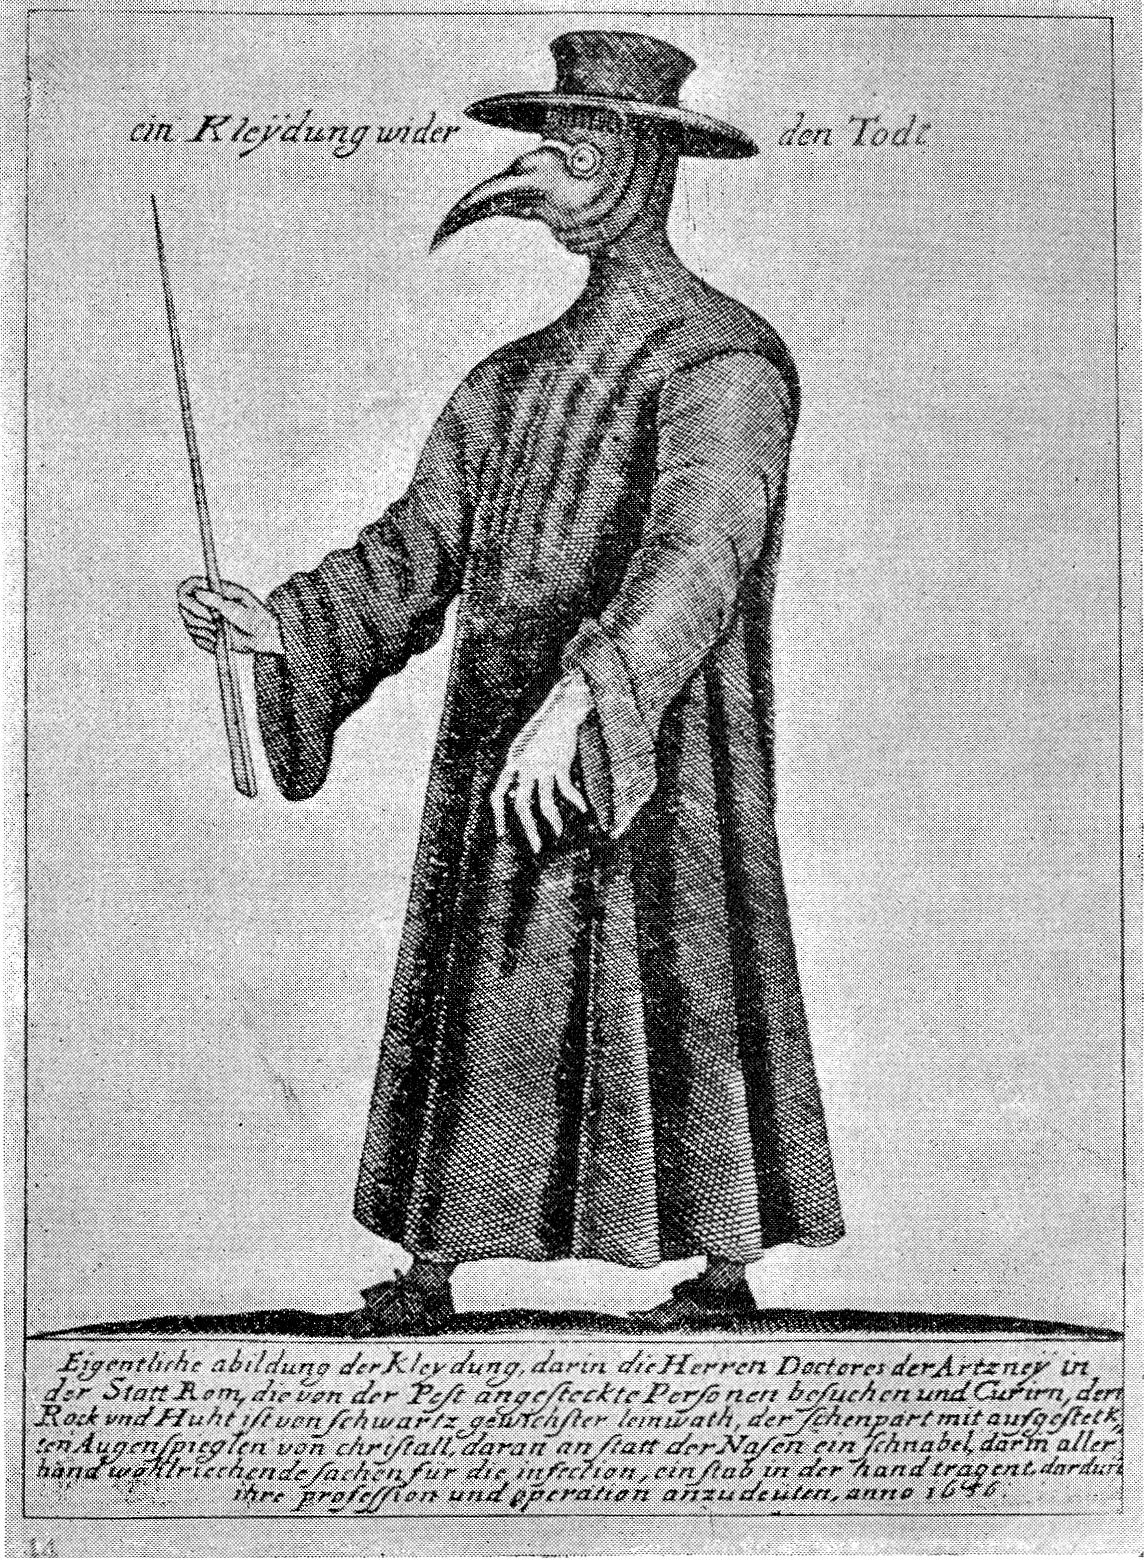 Plague doctor. Image: Wellcome Collection